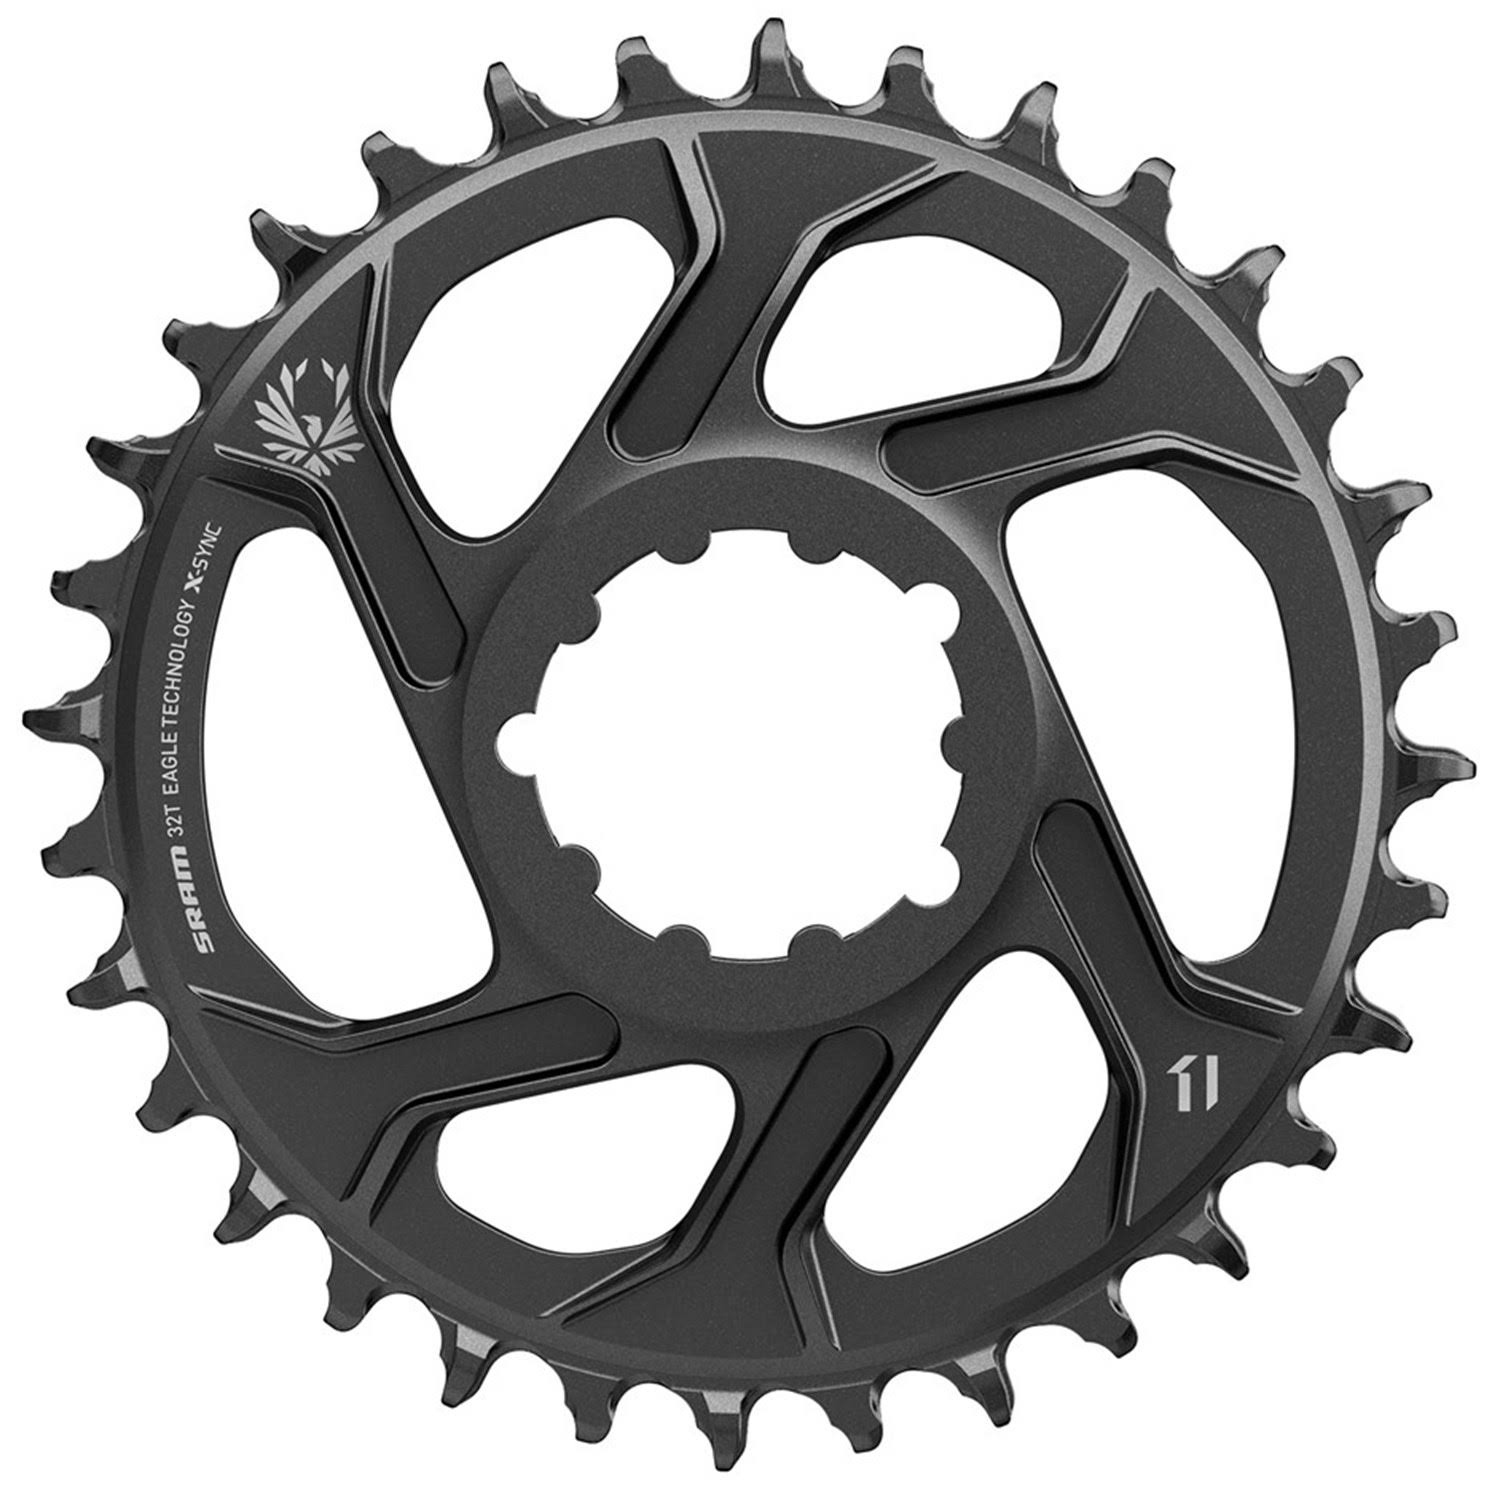 SRAM X-sync 2 Eagle Chainring - Black, 30t Direct Mount, 3mm Offset Boost